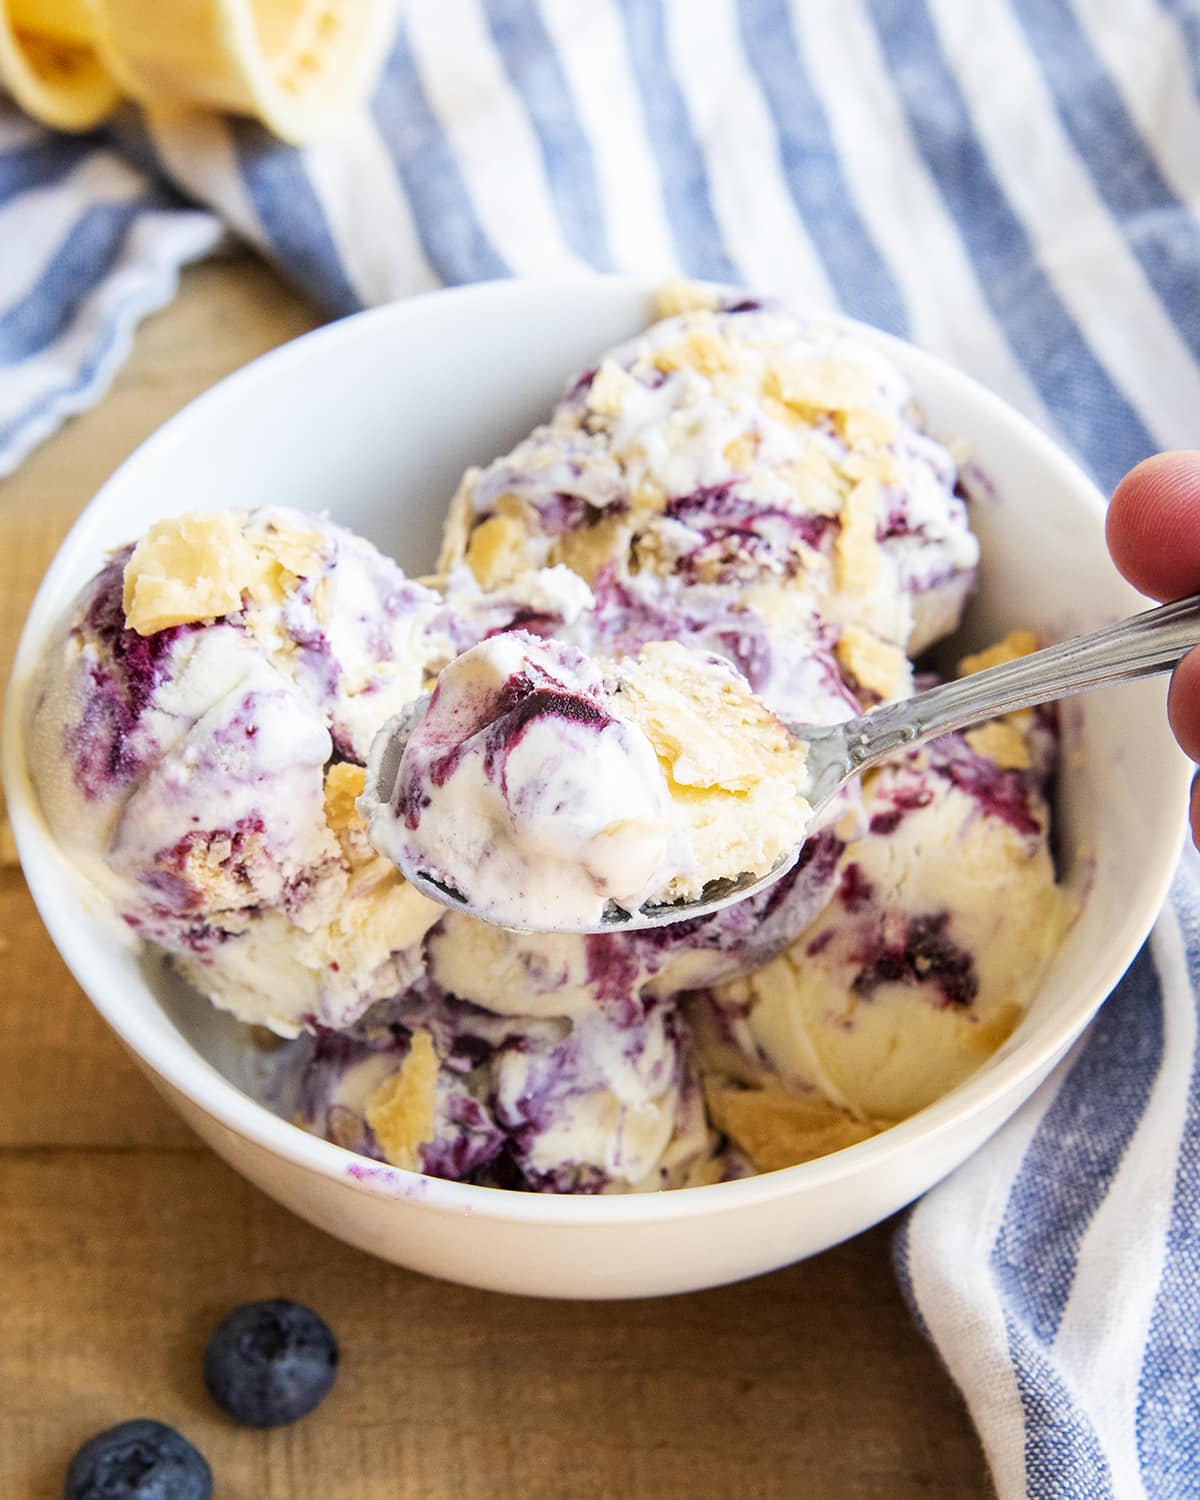 A bowl of blueberry pie ice cream with pie crust pieces crumbled on top.